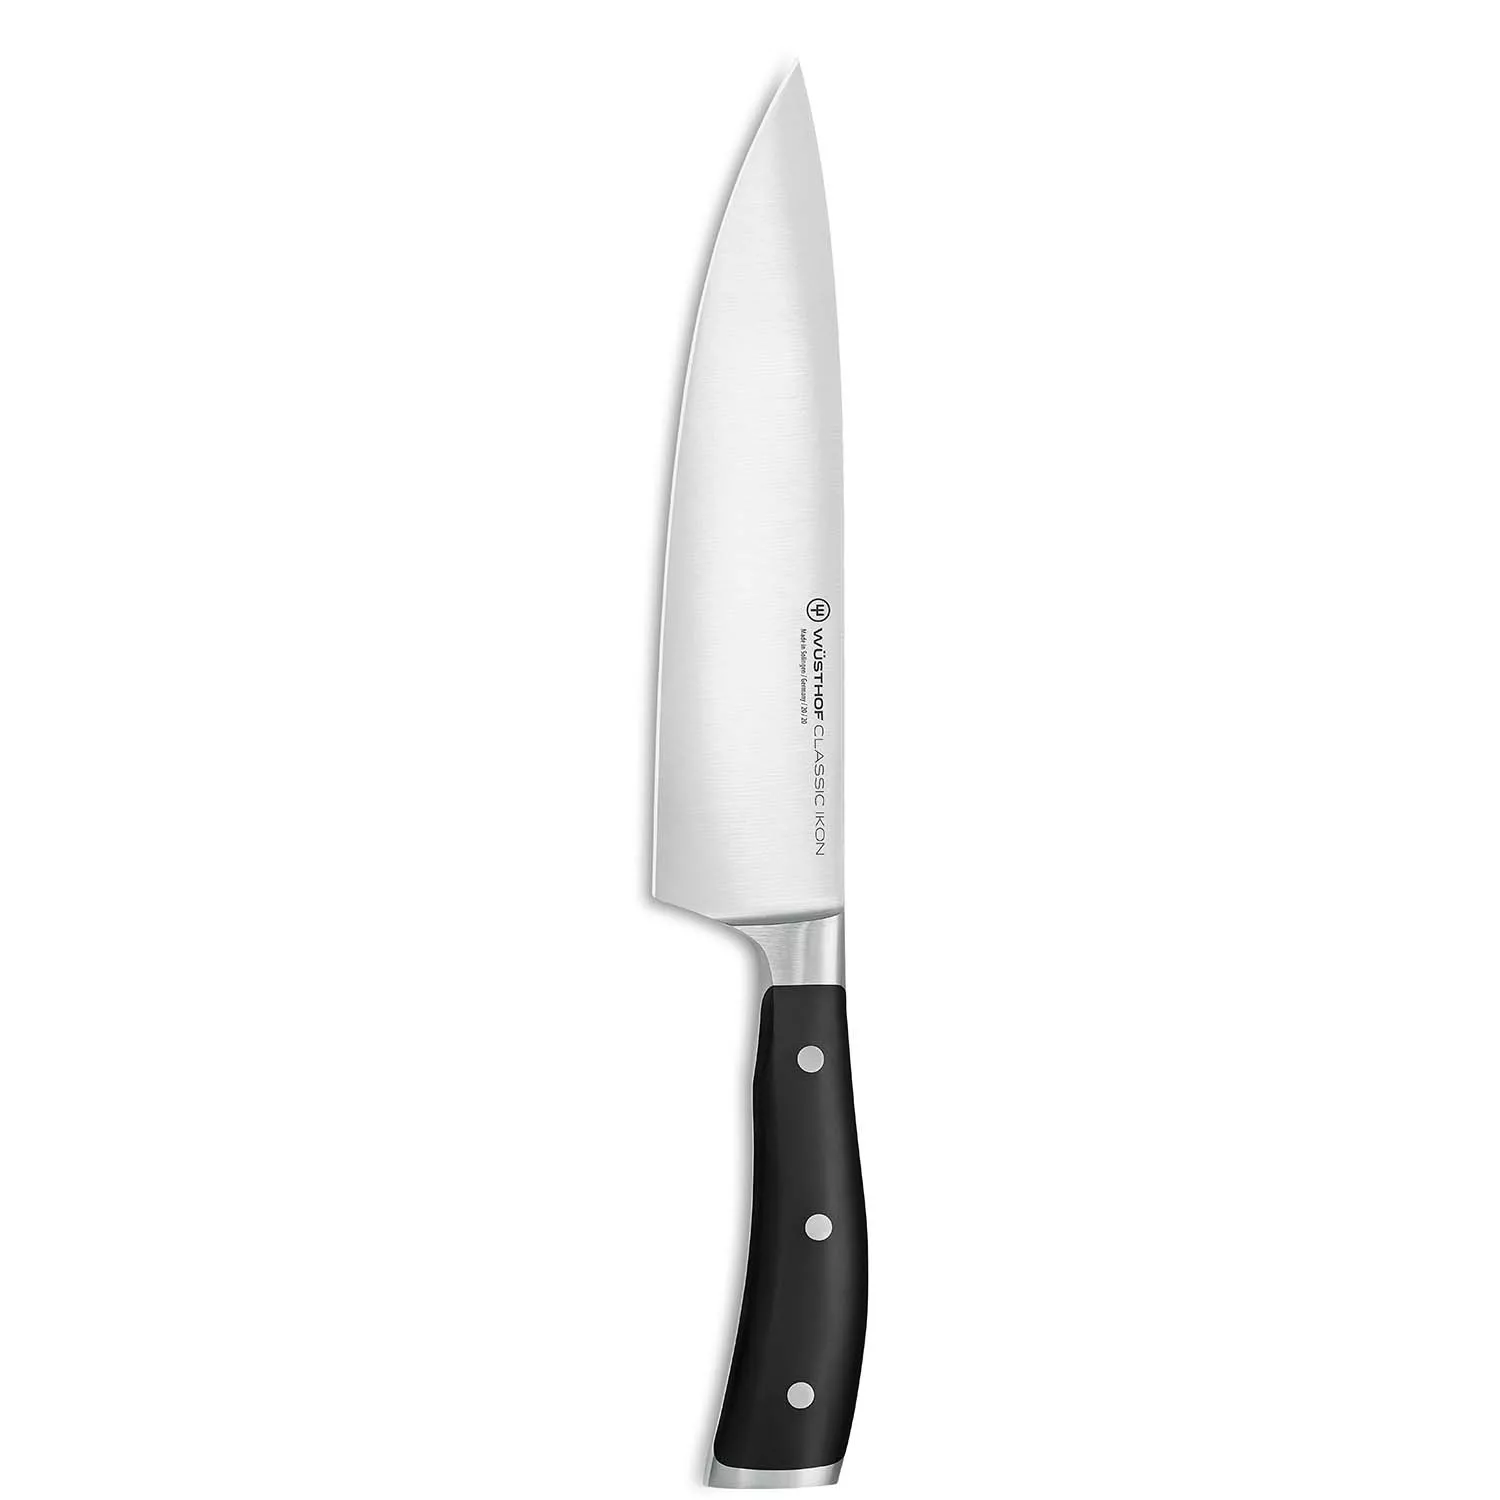 Wusthof Classic Butcher Knife, 8-Inch, Black, Stainless Steel